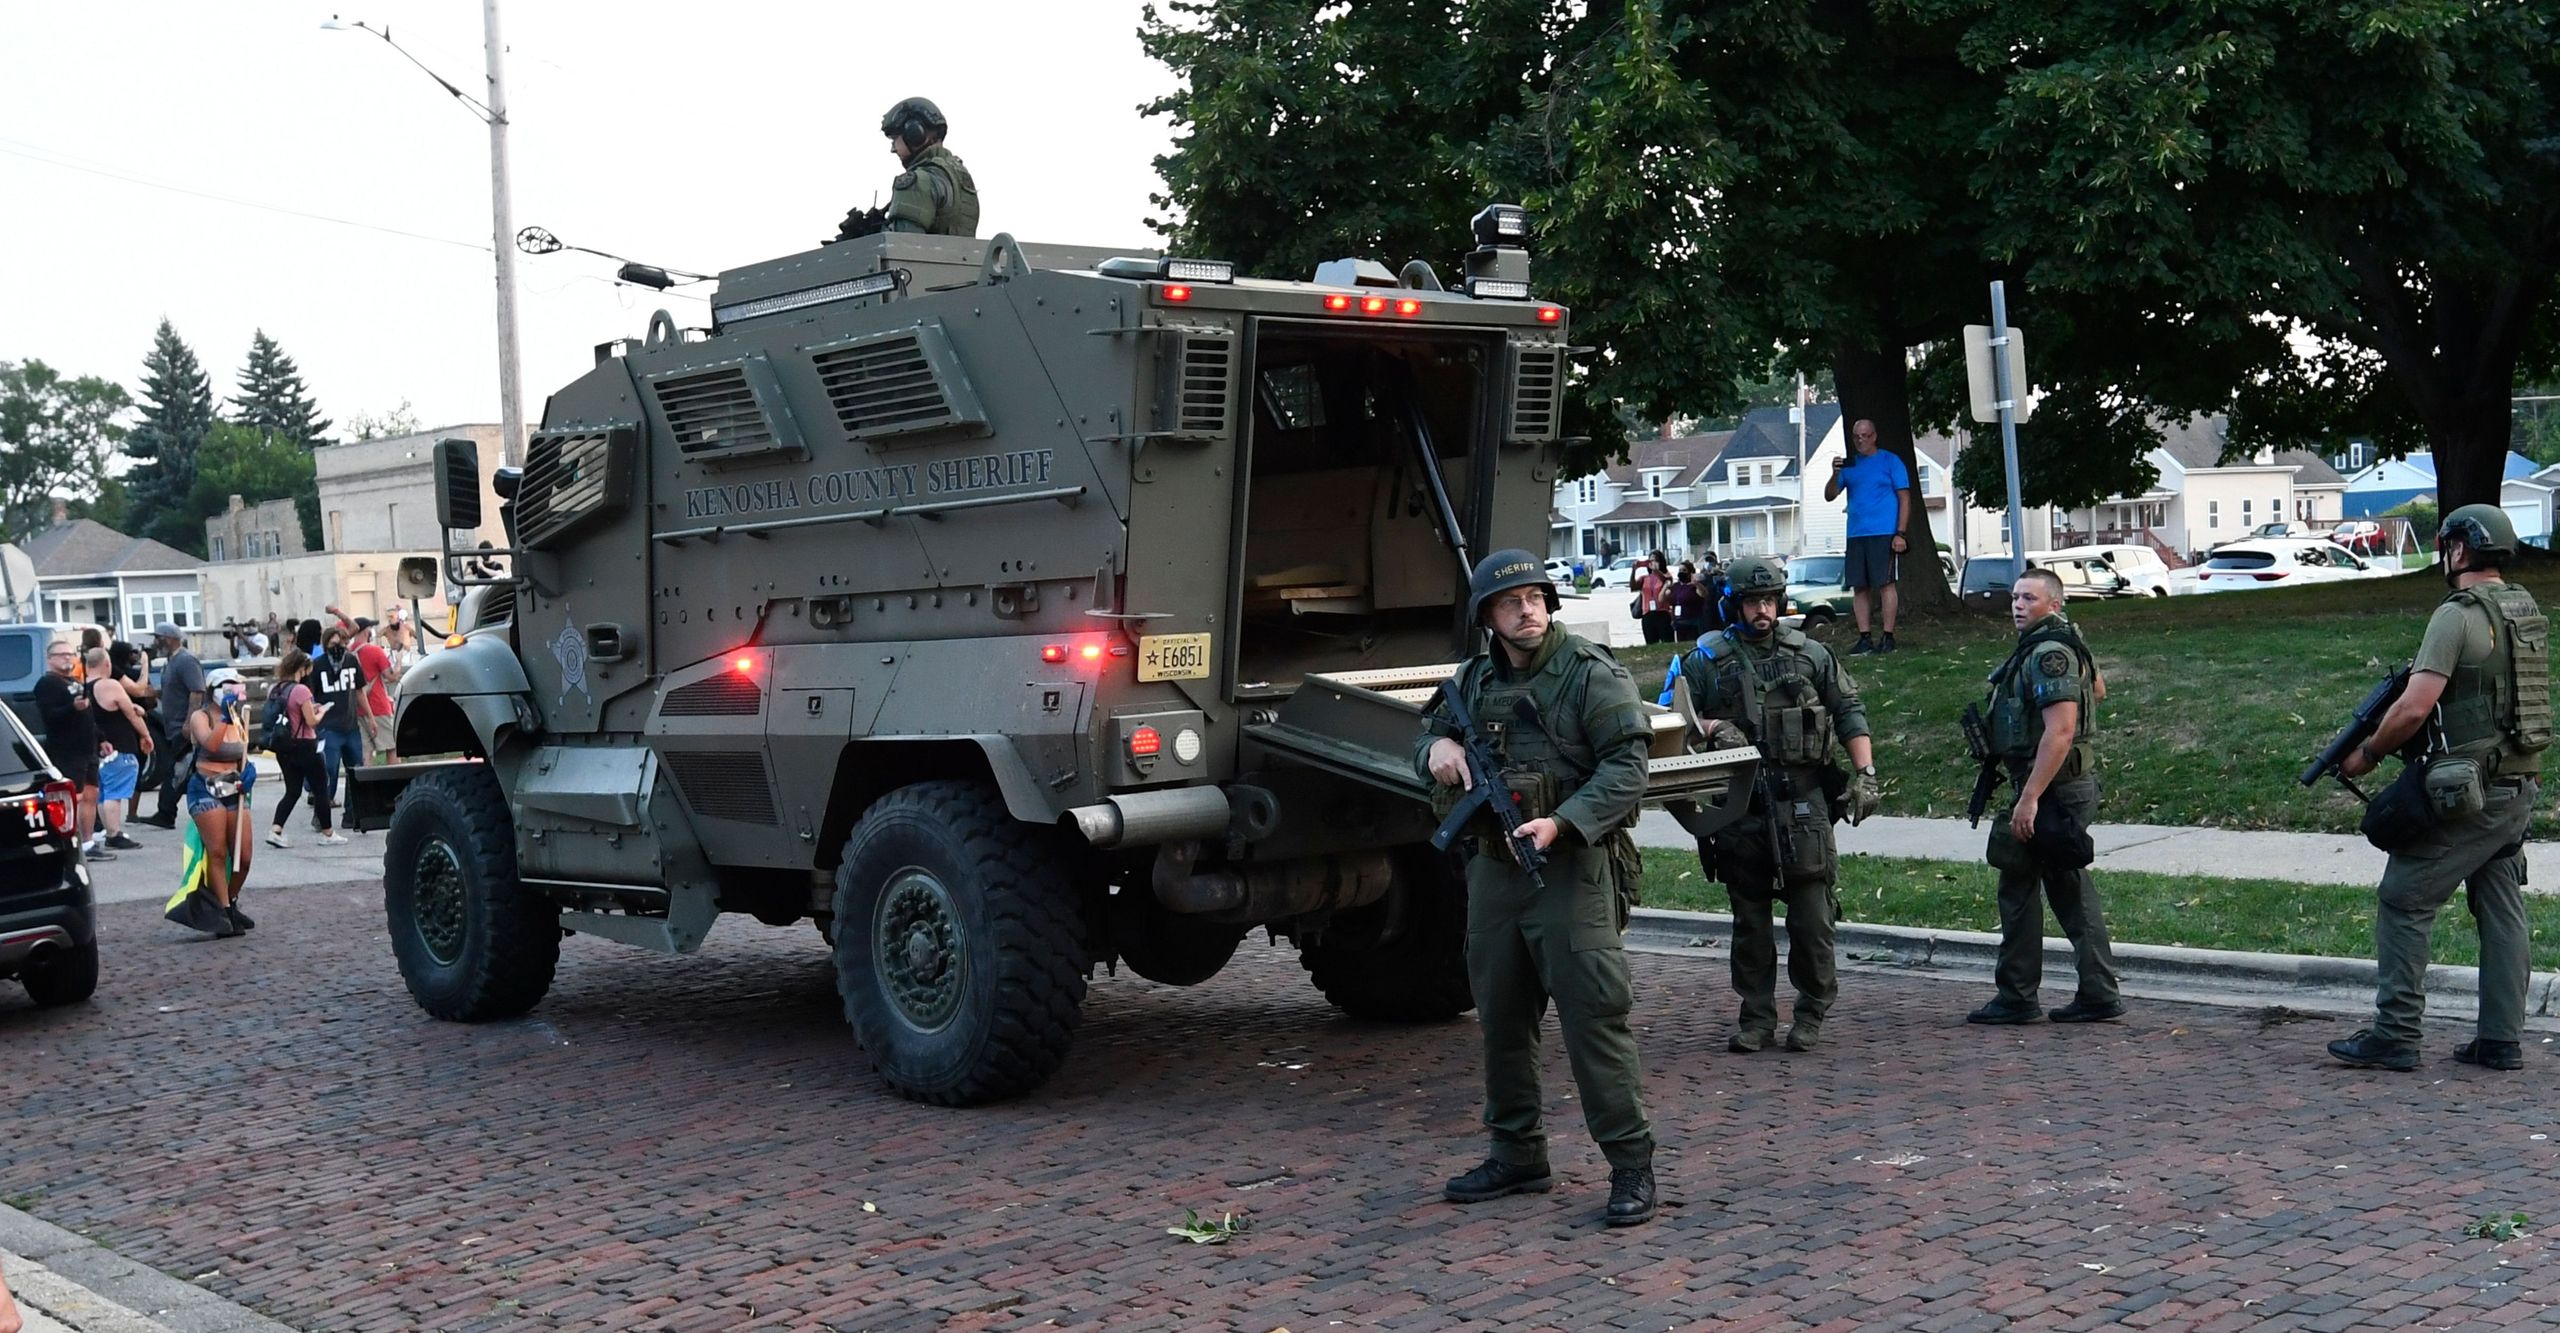 Officers arrive at the scene of a protest in a Kenosha County Sheriff&rsquo;s Department armored vehicle on Aug. 26, 2020.